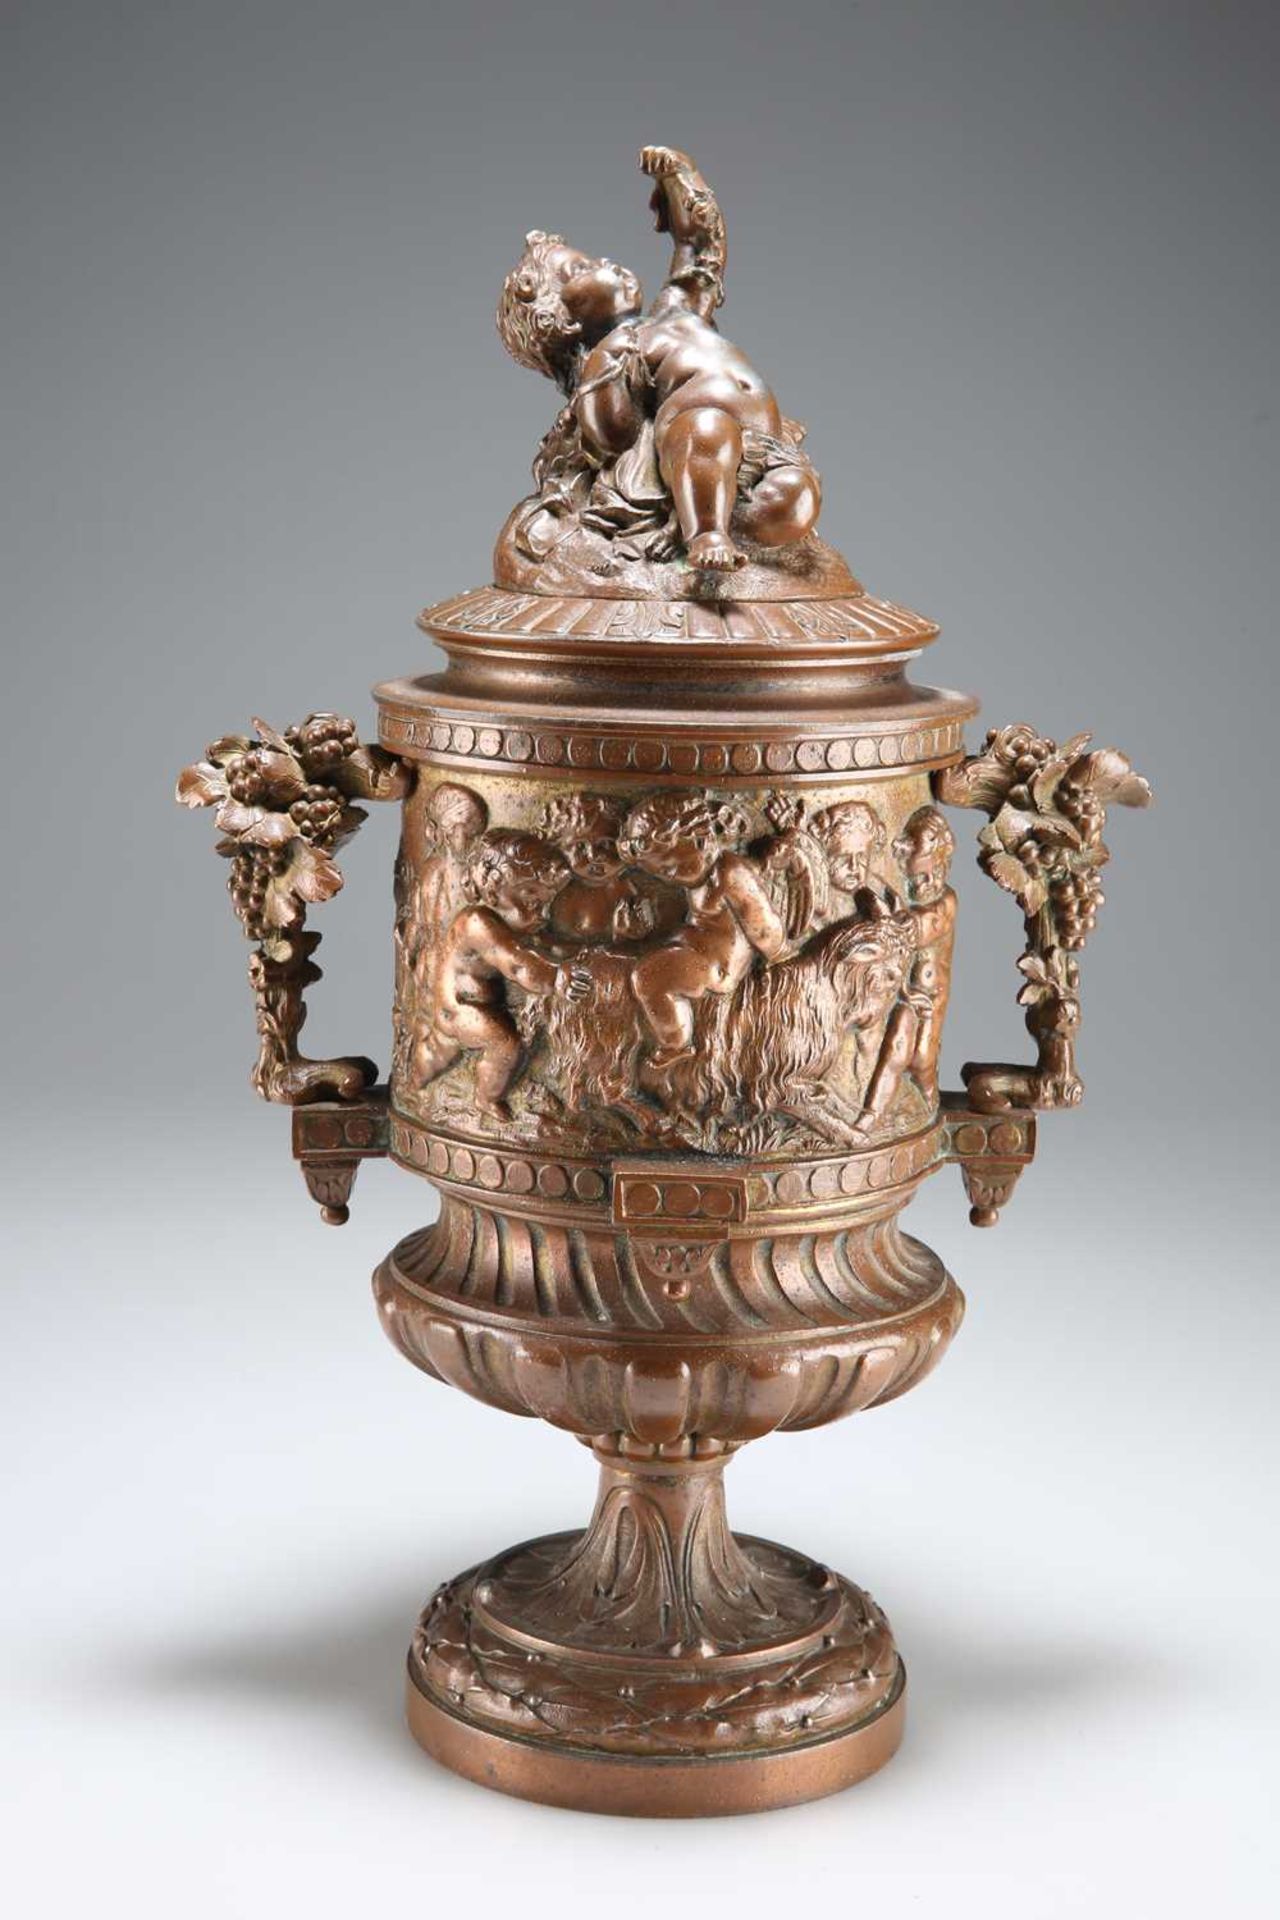 A LATE 19TH CENTURY FRENCH BRONZE URN, IN THE MANNER OF CLODION